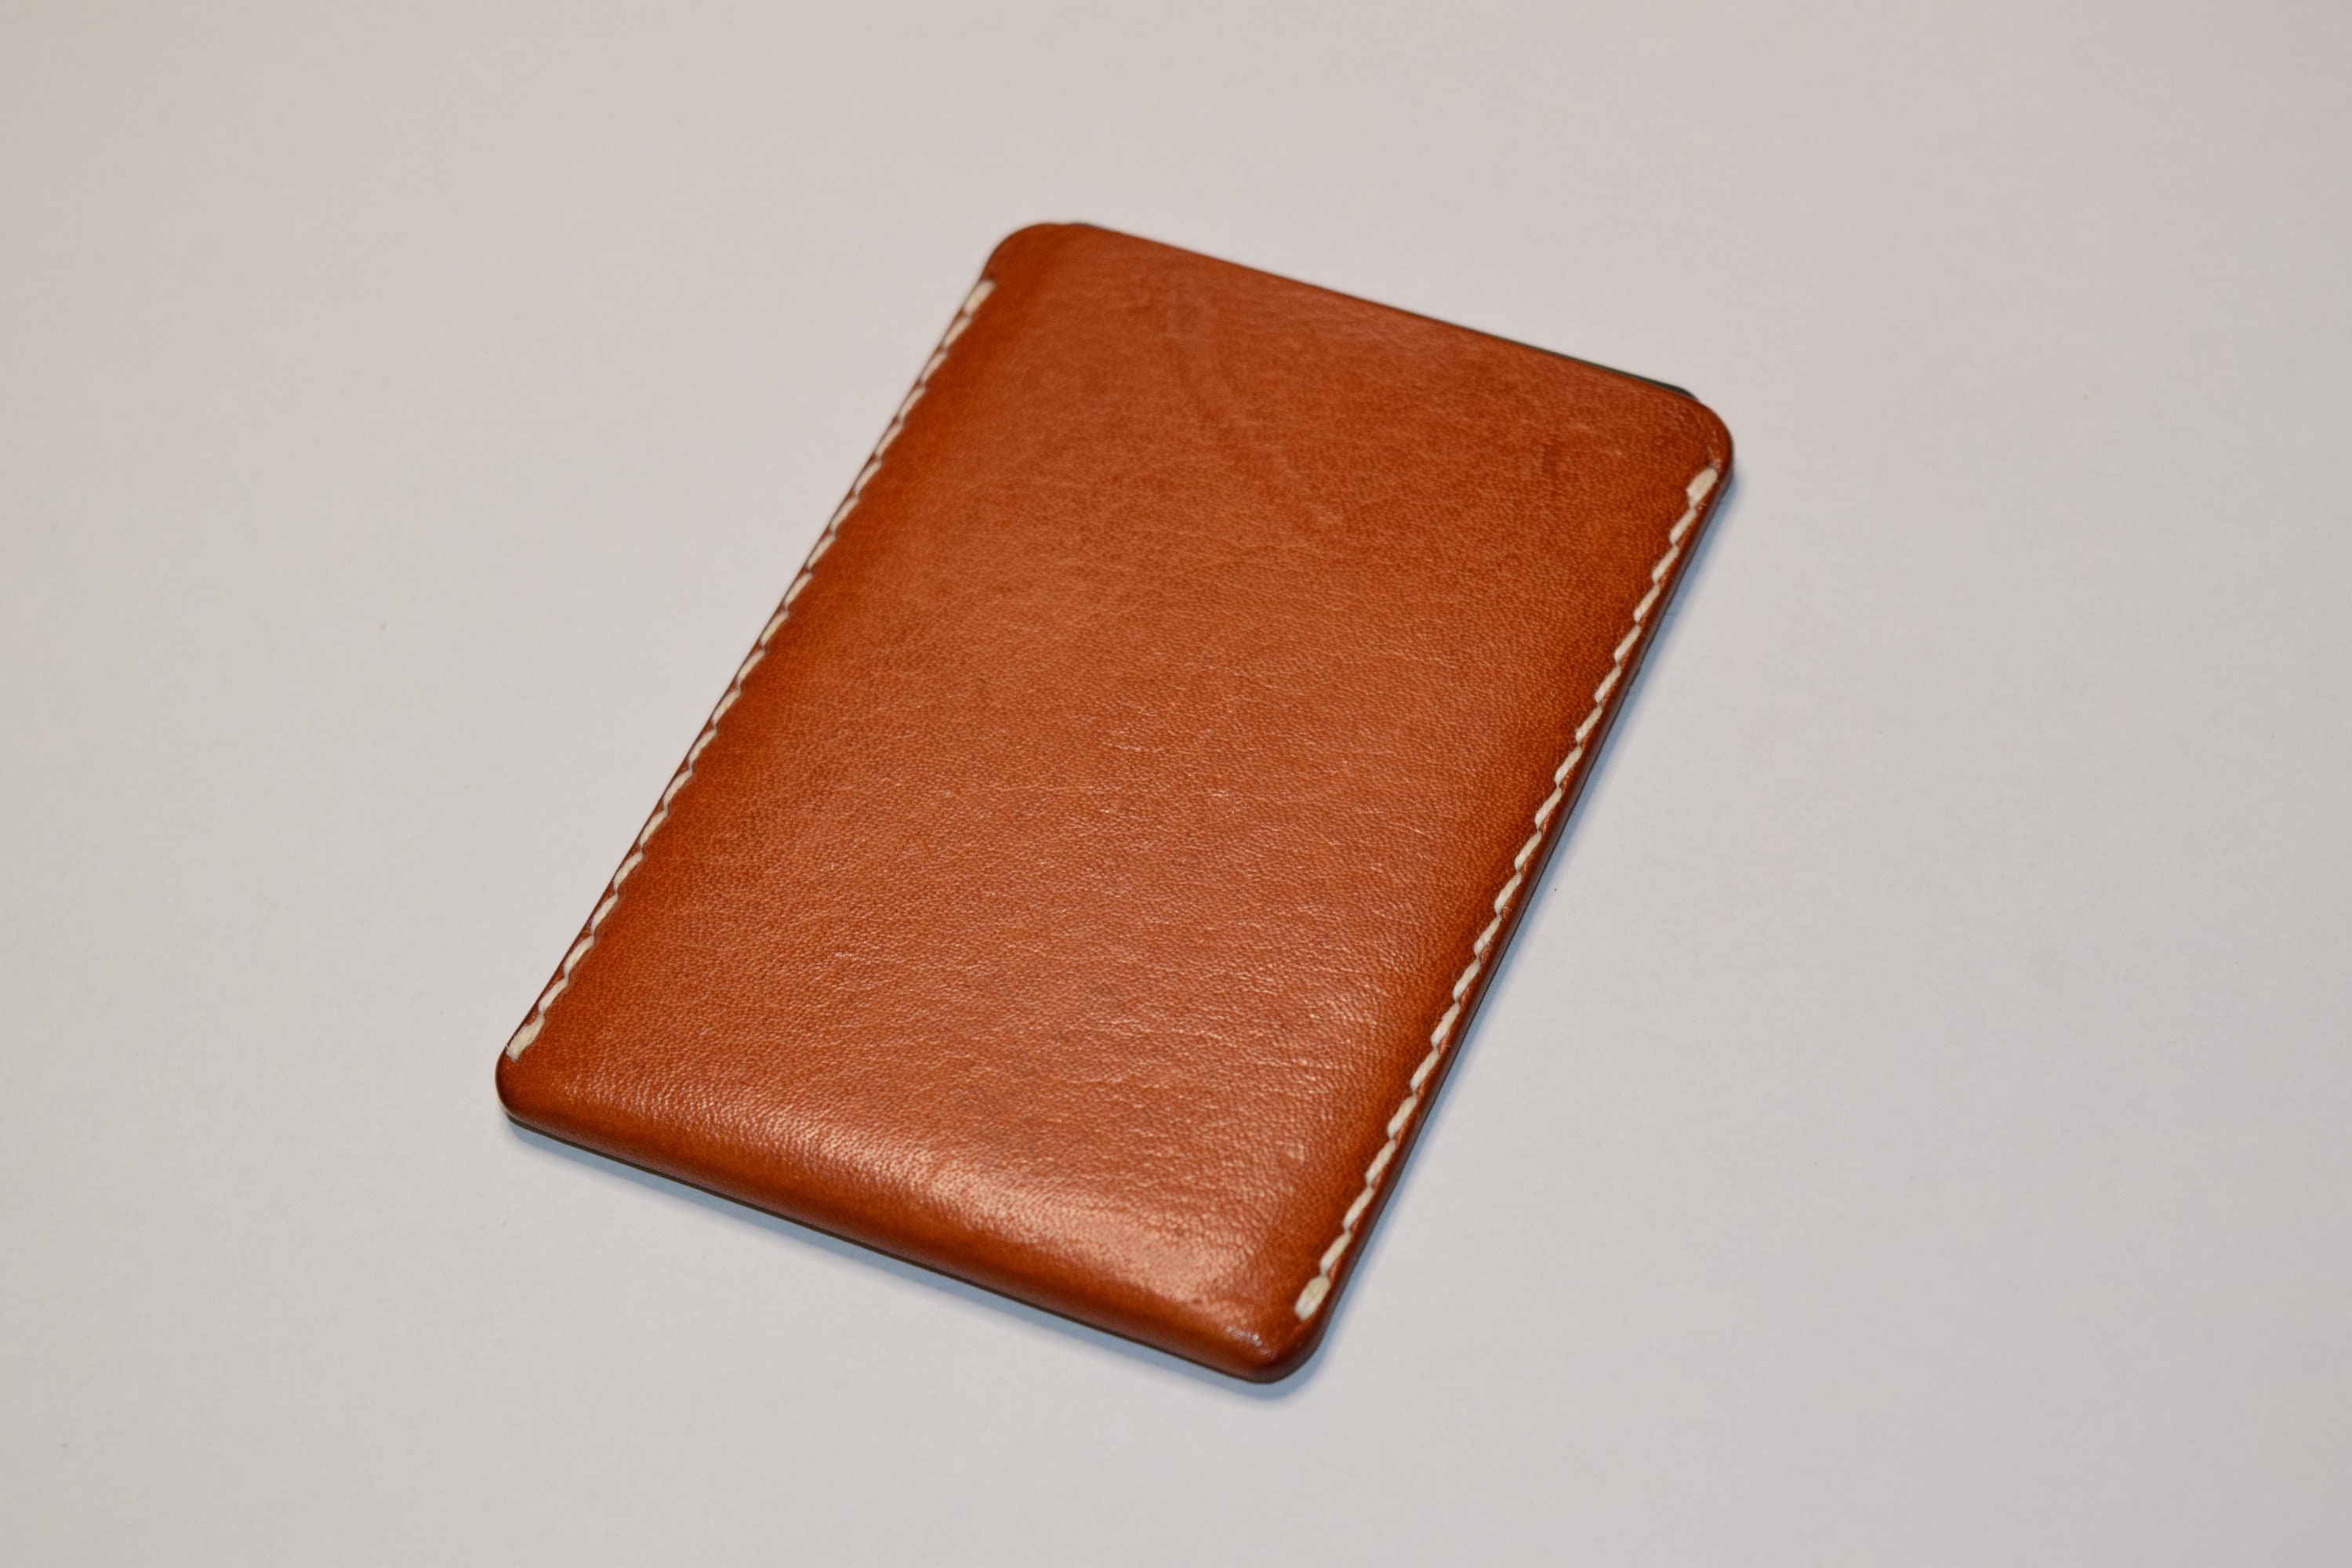 Beaver Tail & Kangaroo Leather Wallet Perfect Gift for Him 